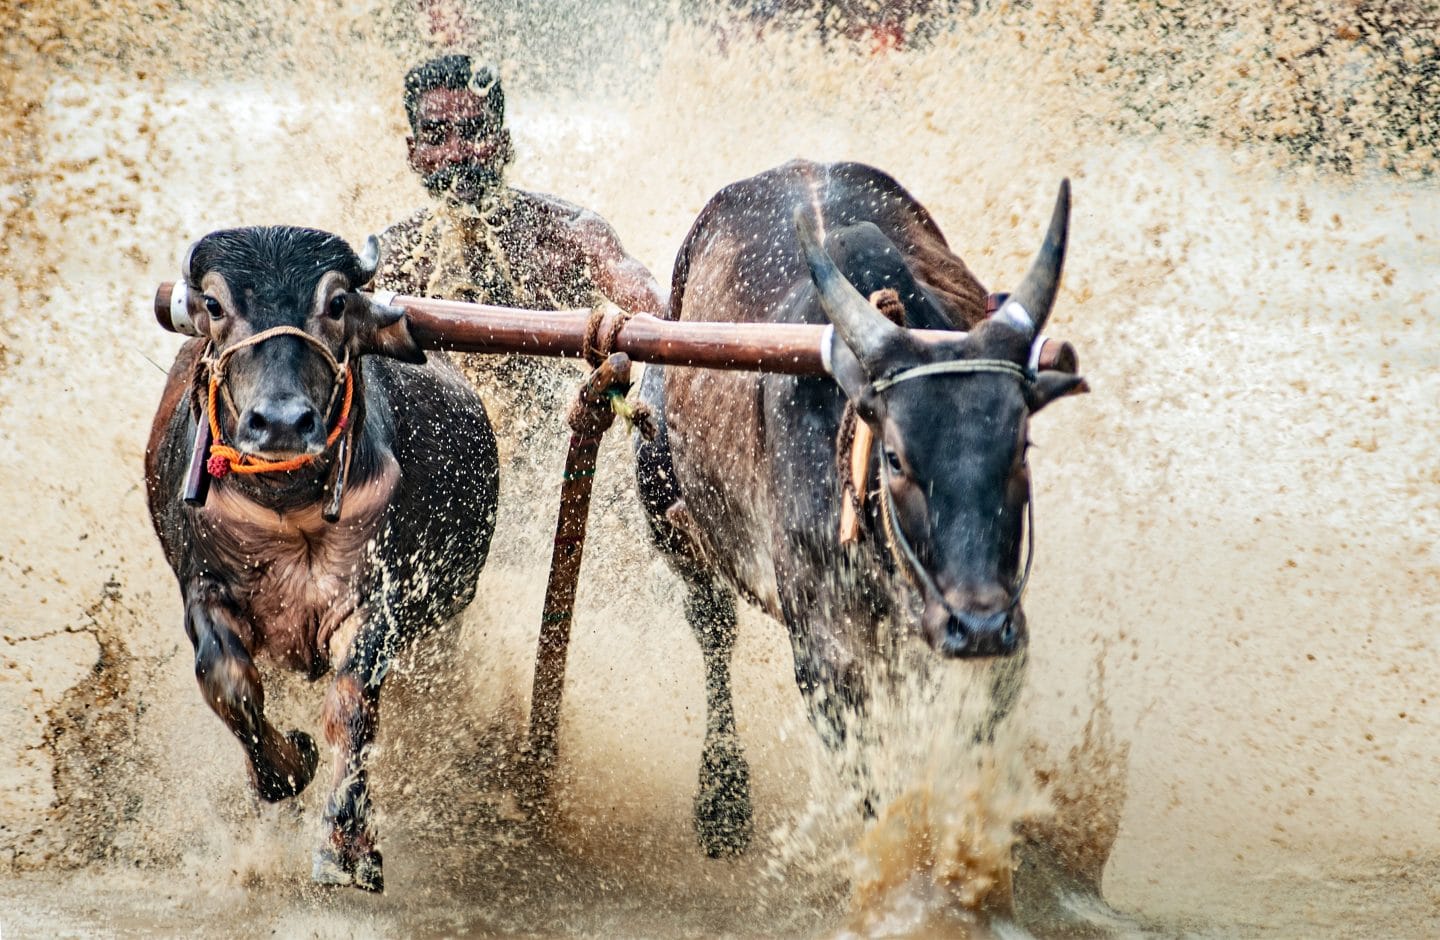 Indian cattle race in rice paddy field in India